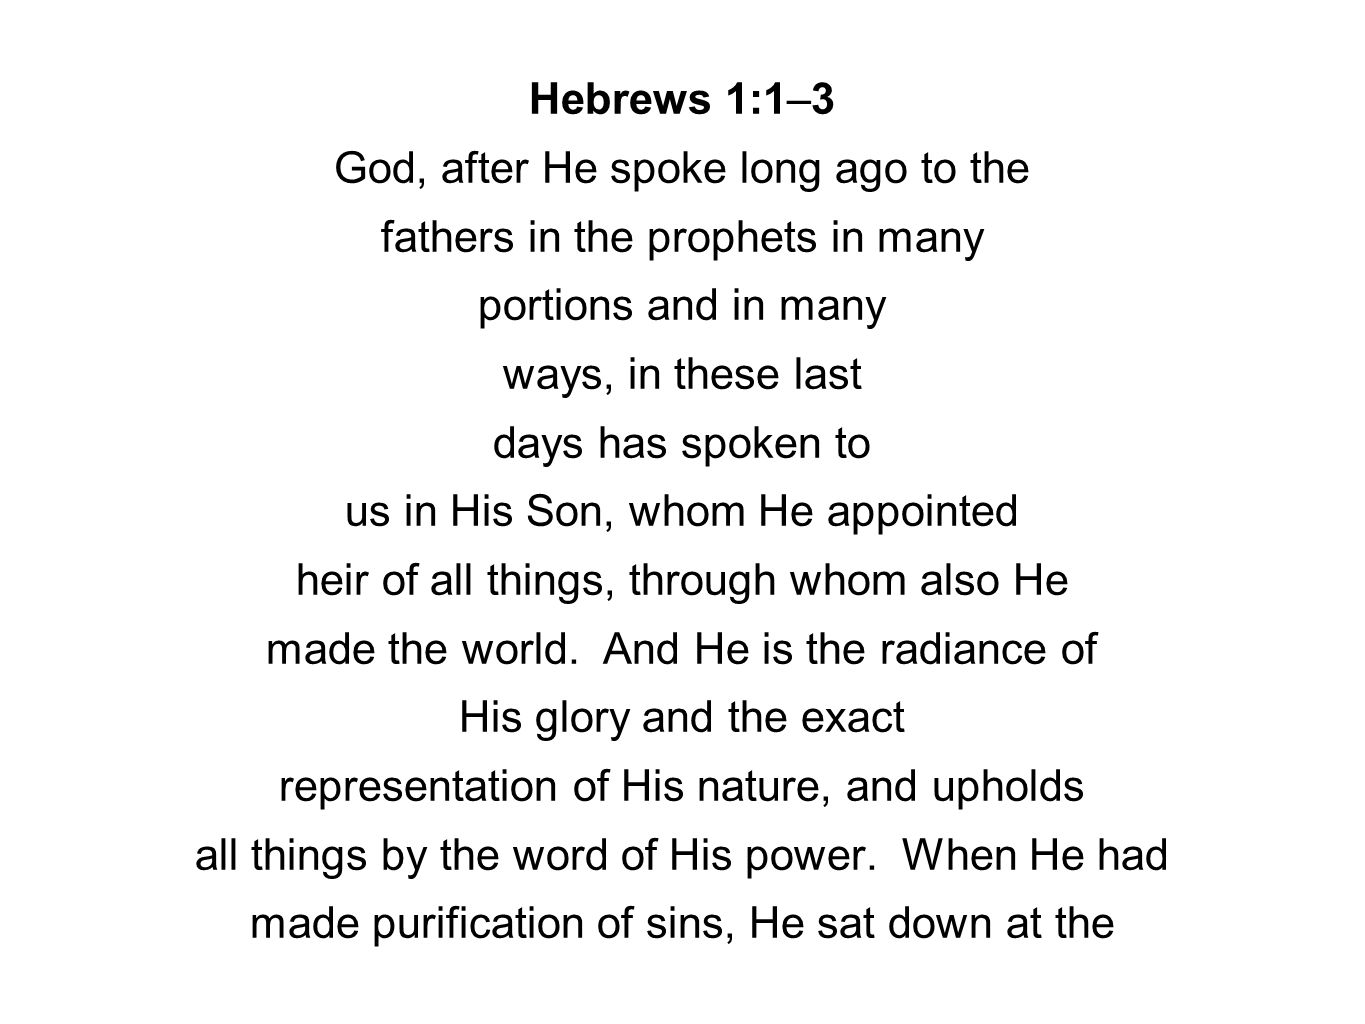 Hebrews 1:1–3 God, after He spoke long ago to the fathers in the prophets in many portions and in many ways, in these last days has spoken to us in His Son, whom He appointed heir of all things, through whom also He made the world.